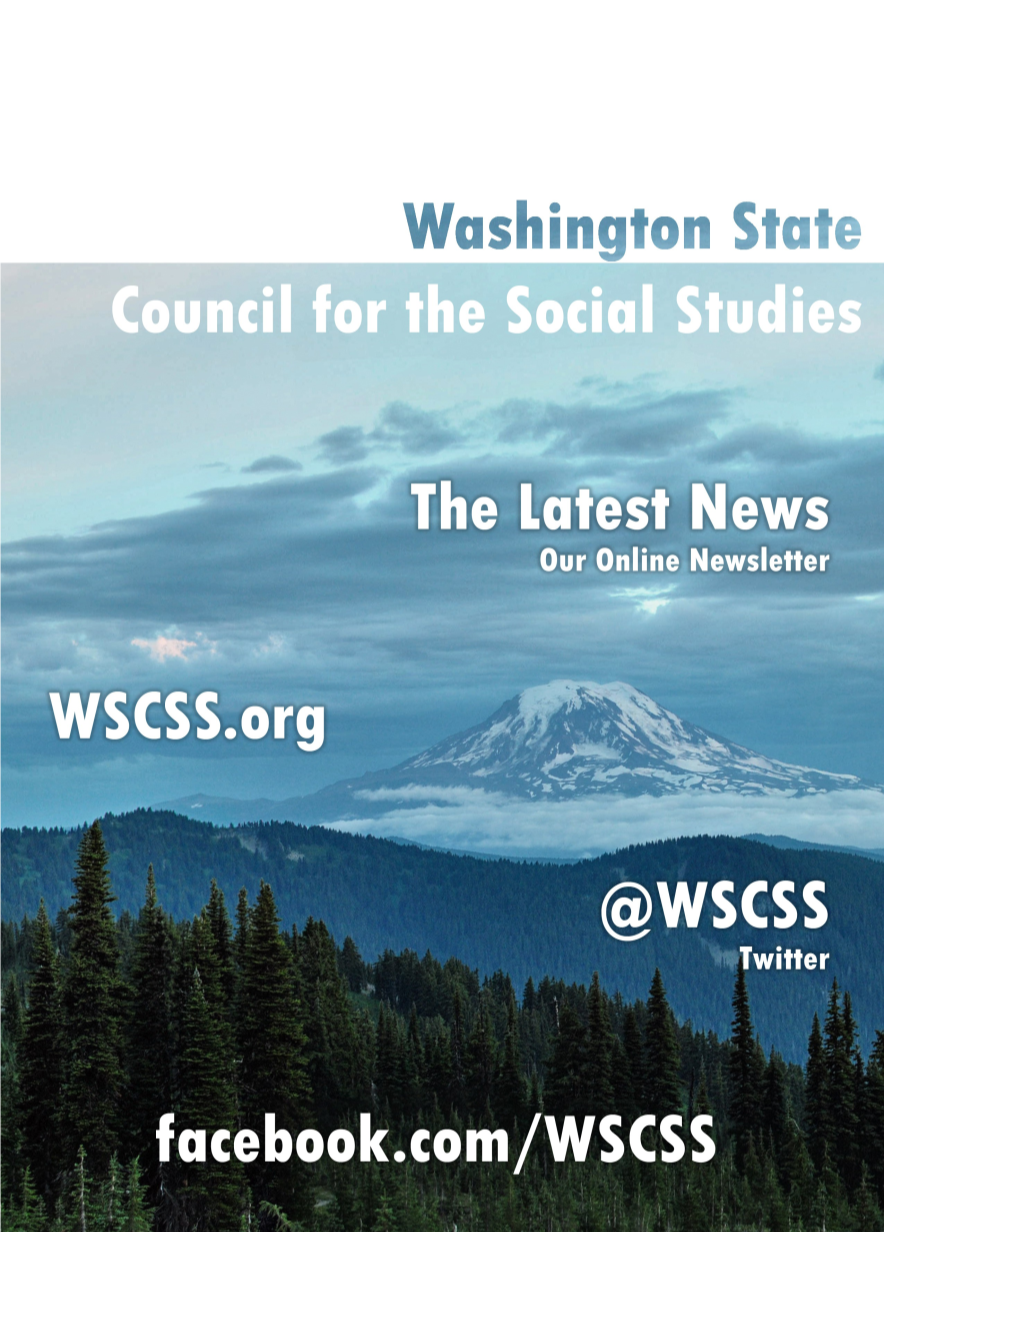 WSCSS Spring Conference in Chelan, Washington